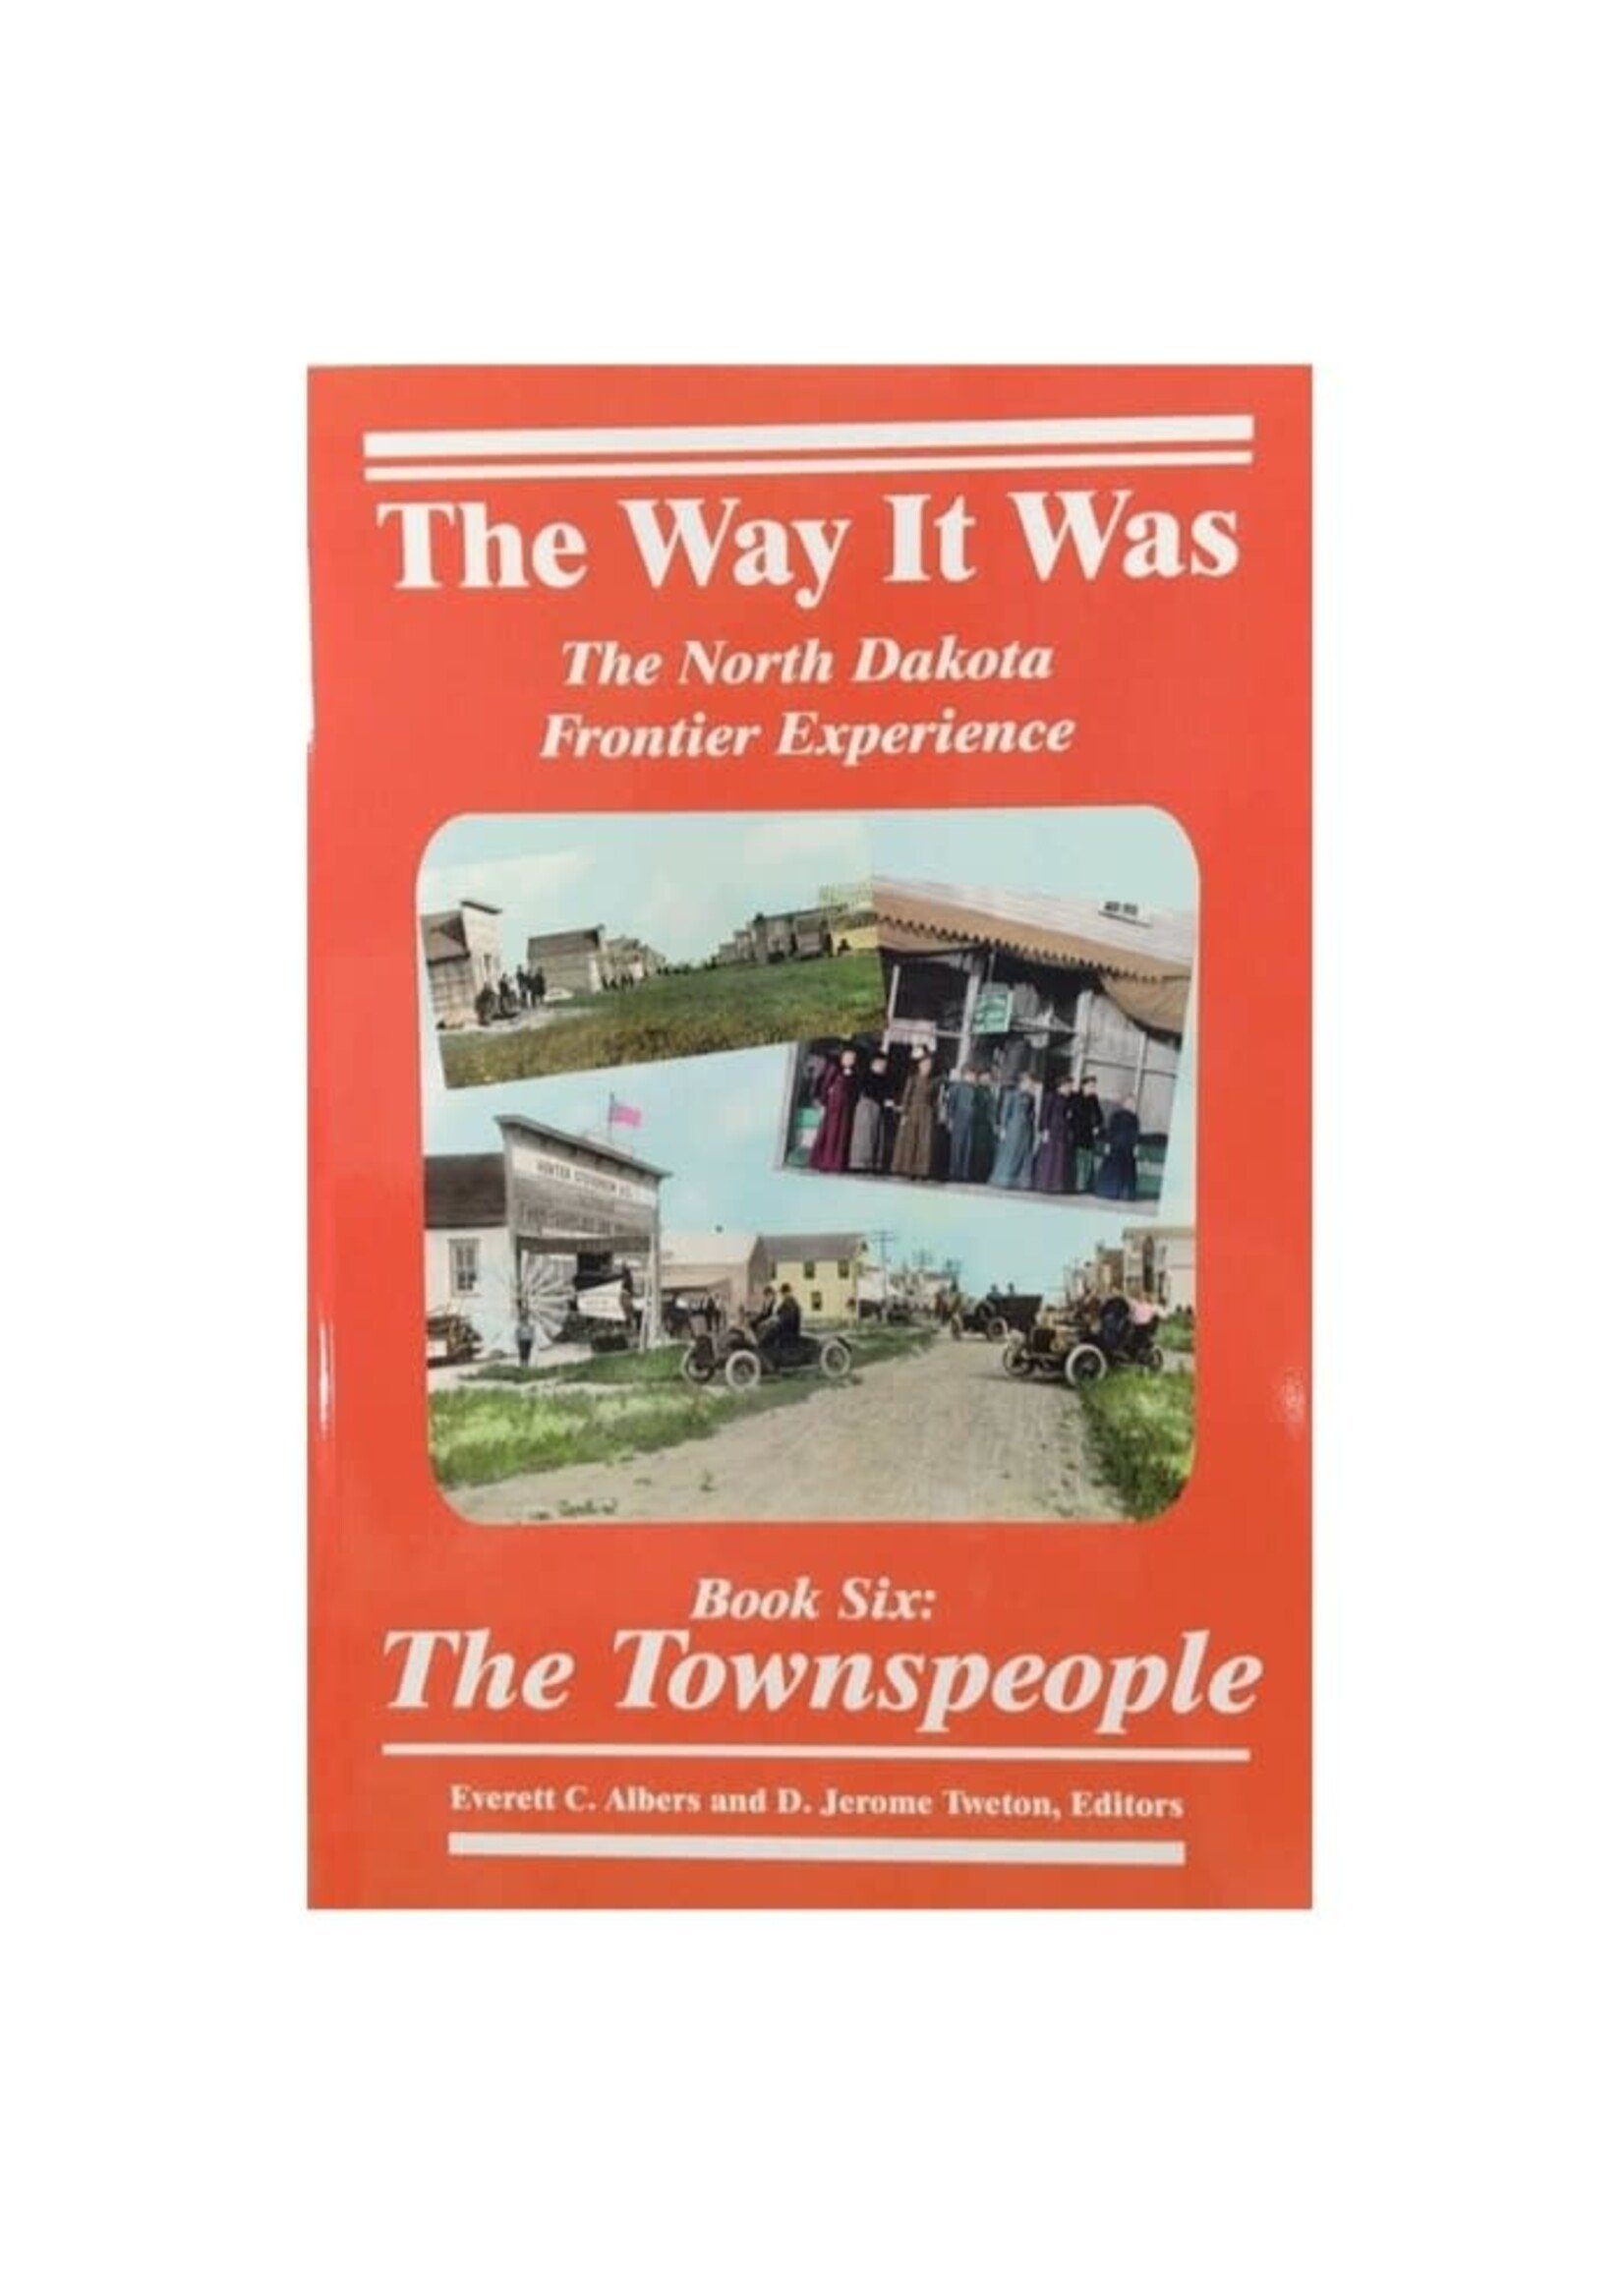 The Way it Was: The North Dakota Frontier Experience: The Townspeople